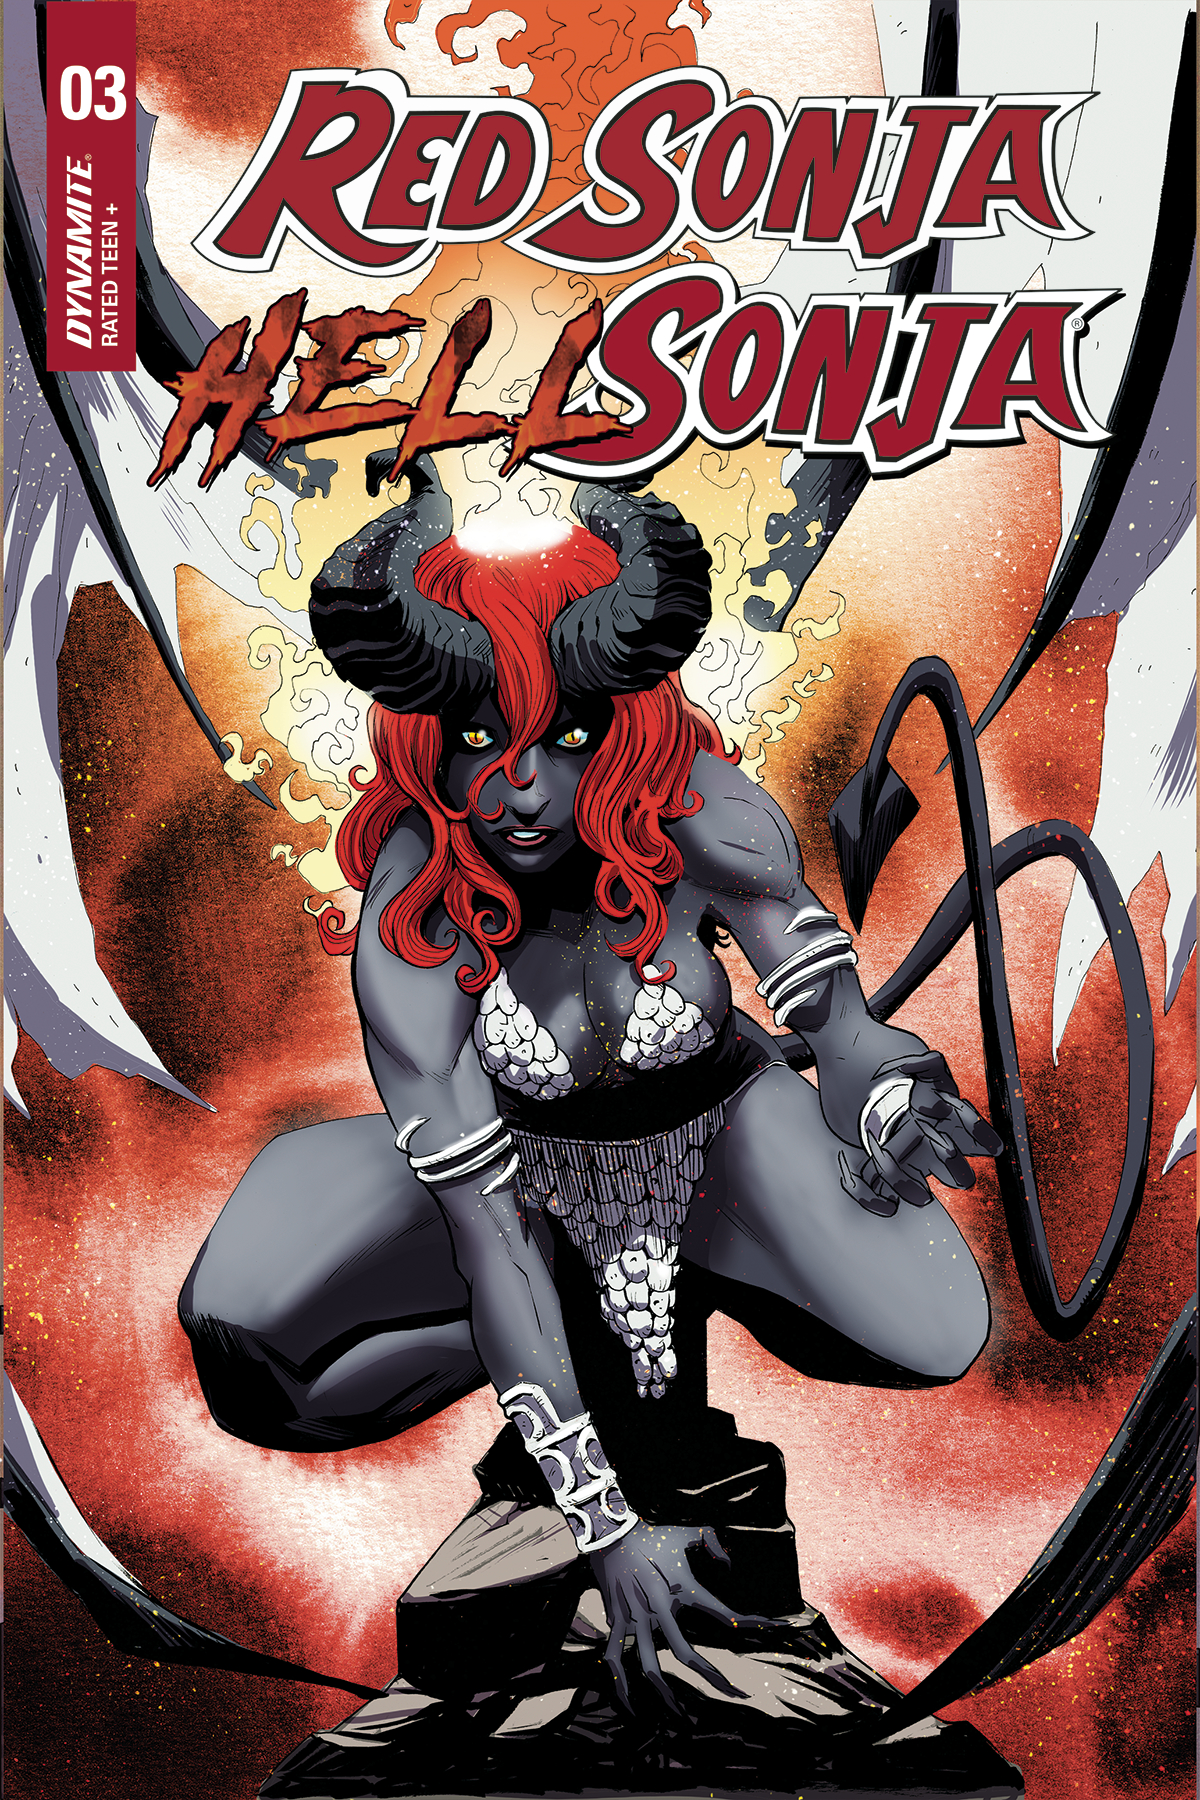 Red Sonja Hell Sonja #3 Cover C Moss